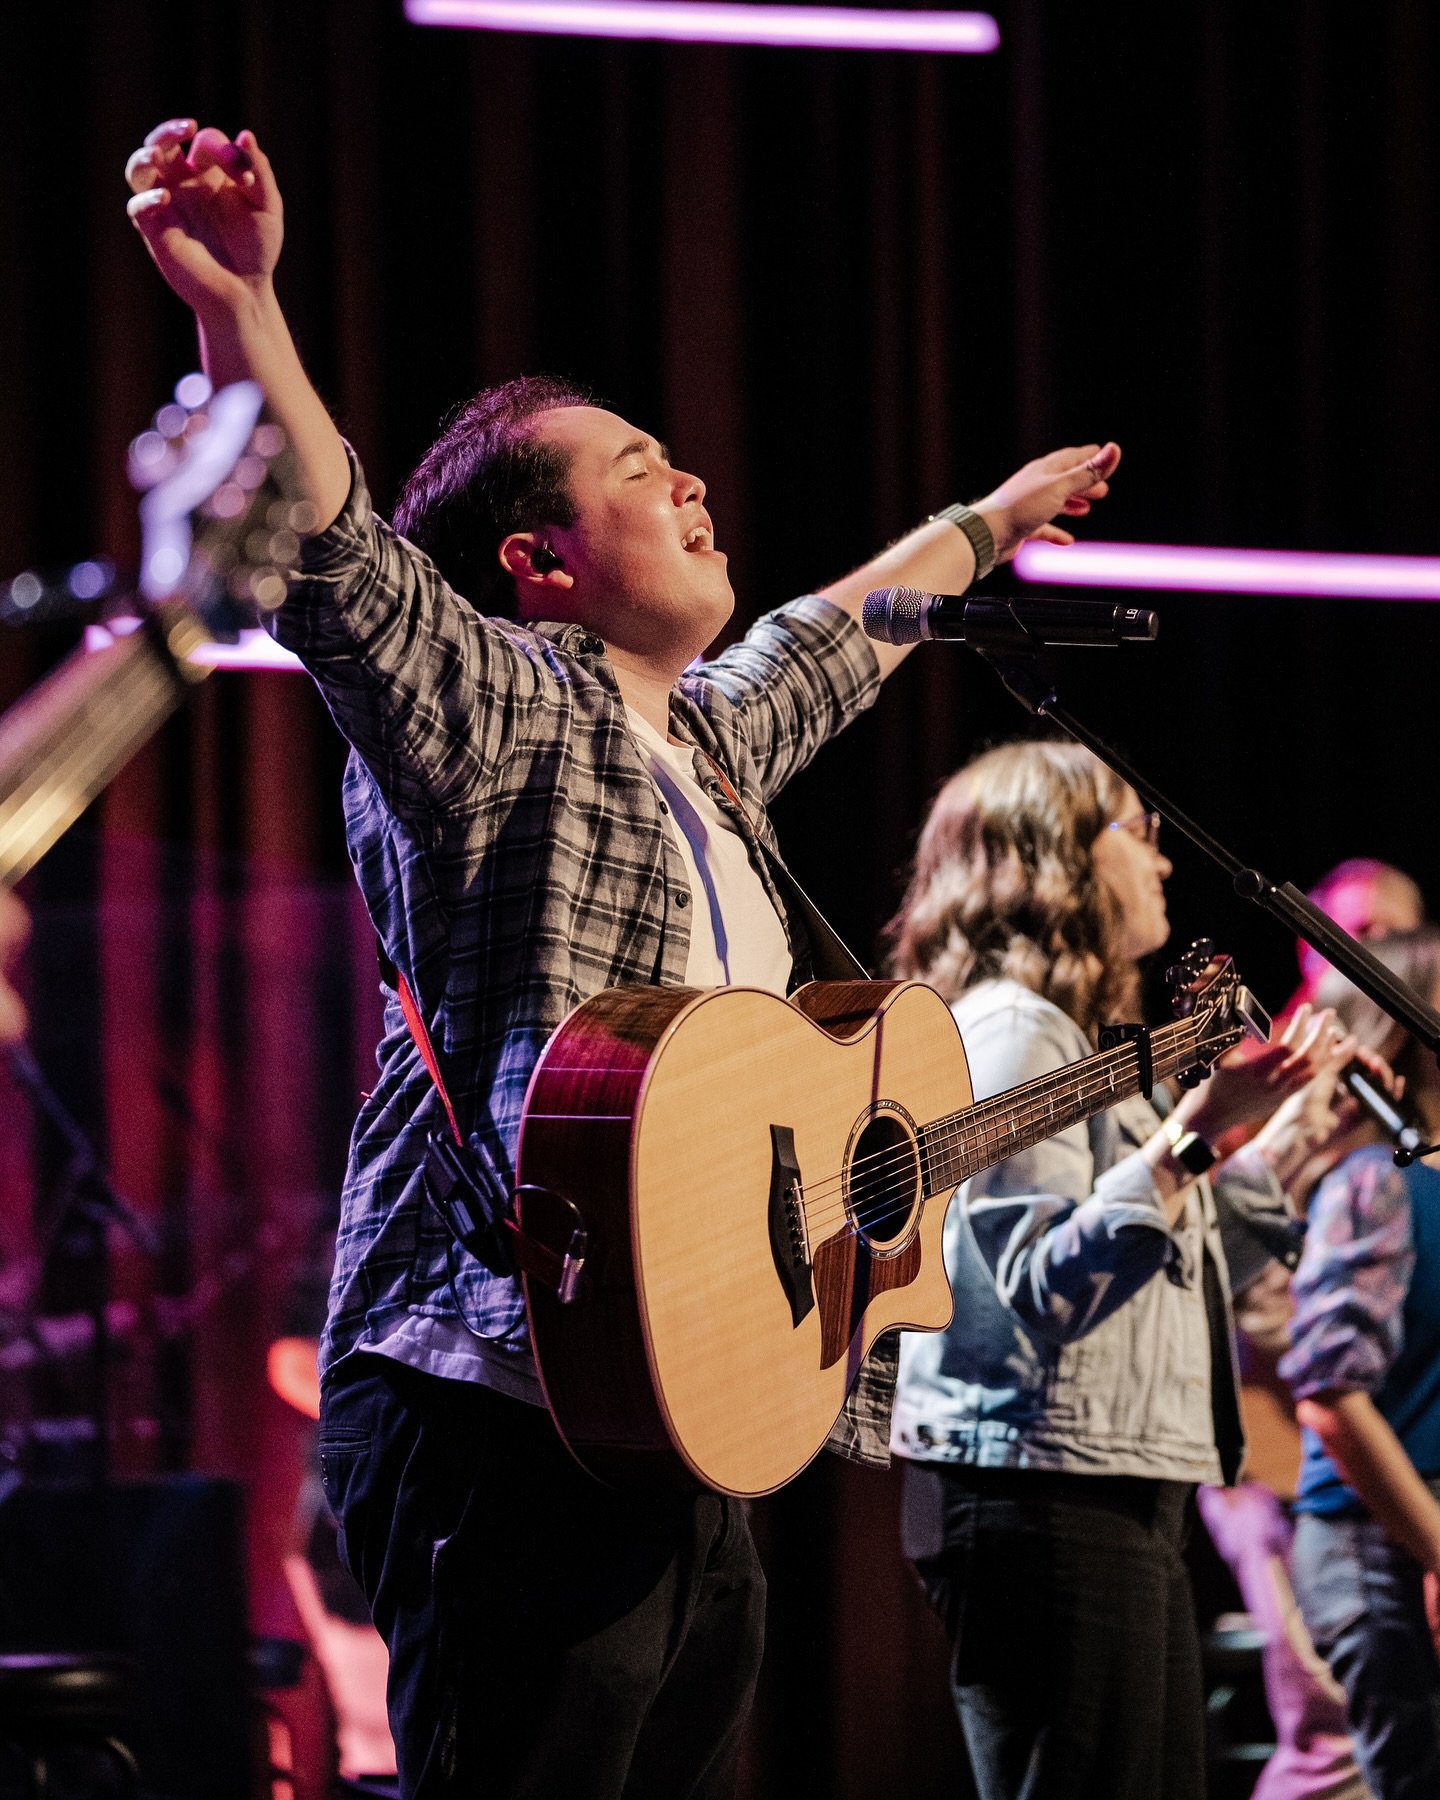 Are you ready to worship Jesus with us this weekend? We can&rsquo;t wait to see you at church. 

Sunday Services
9am, 10:45am and 4pm